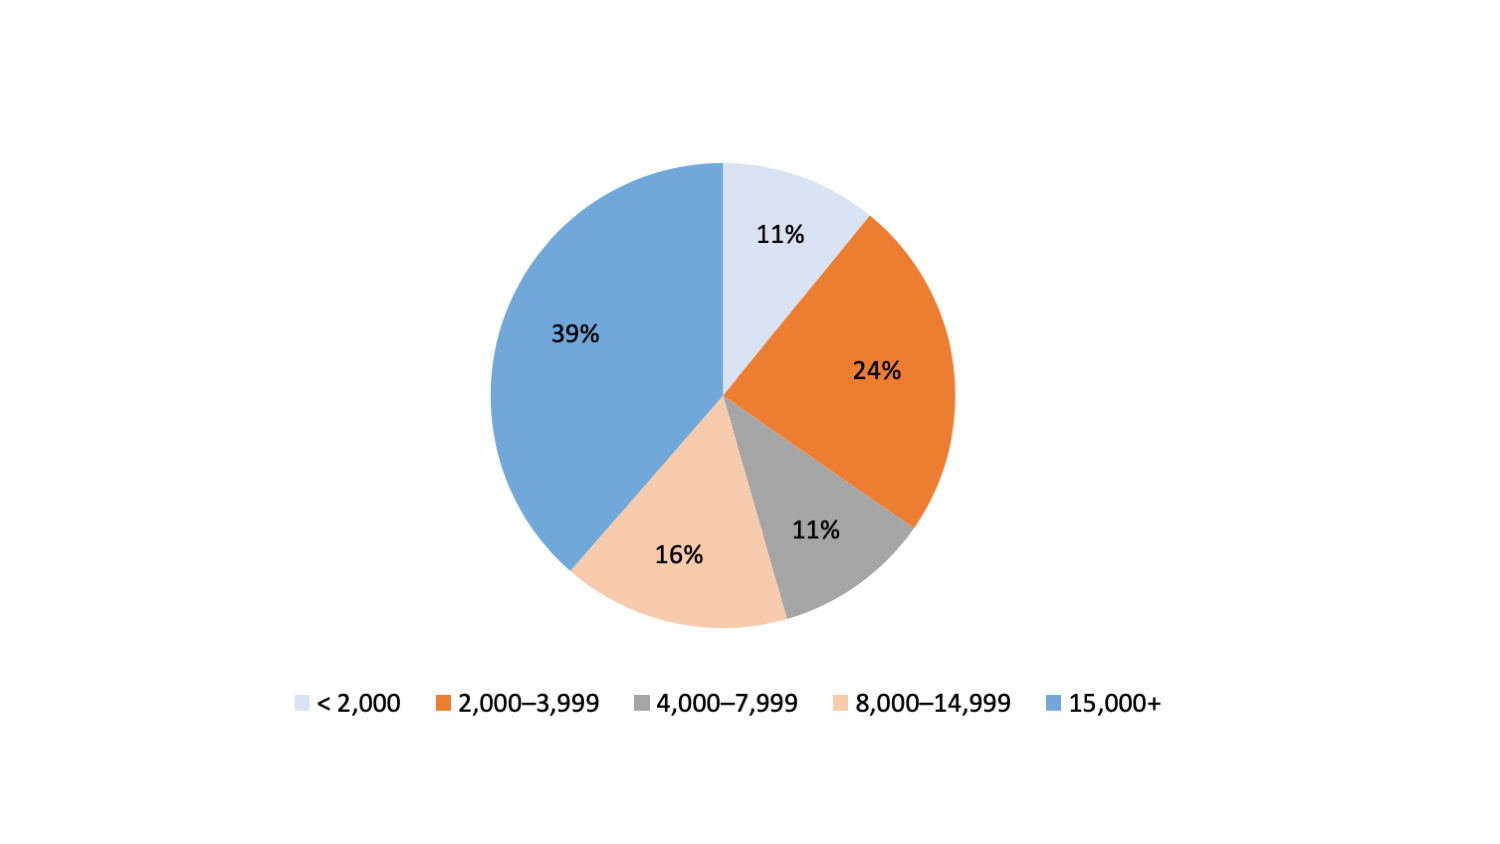 Pie chart of percentage of respondents by institutional FTE